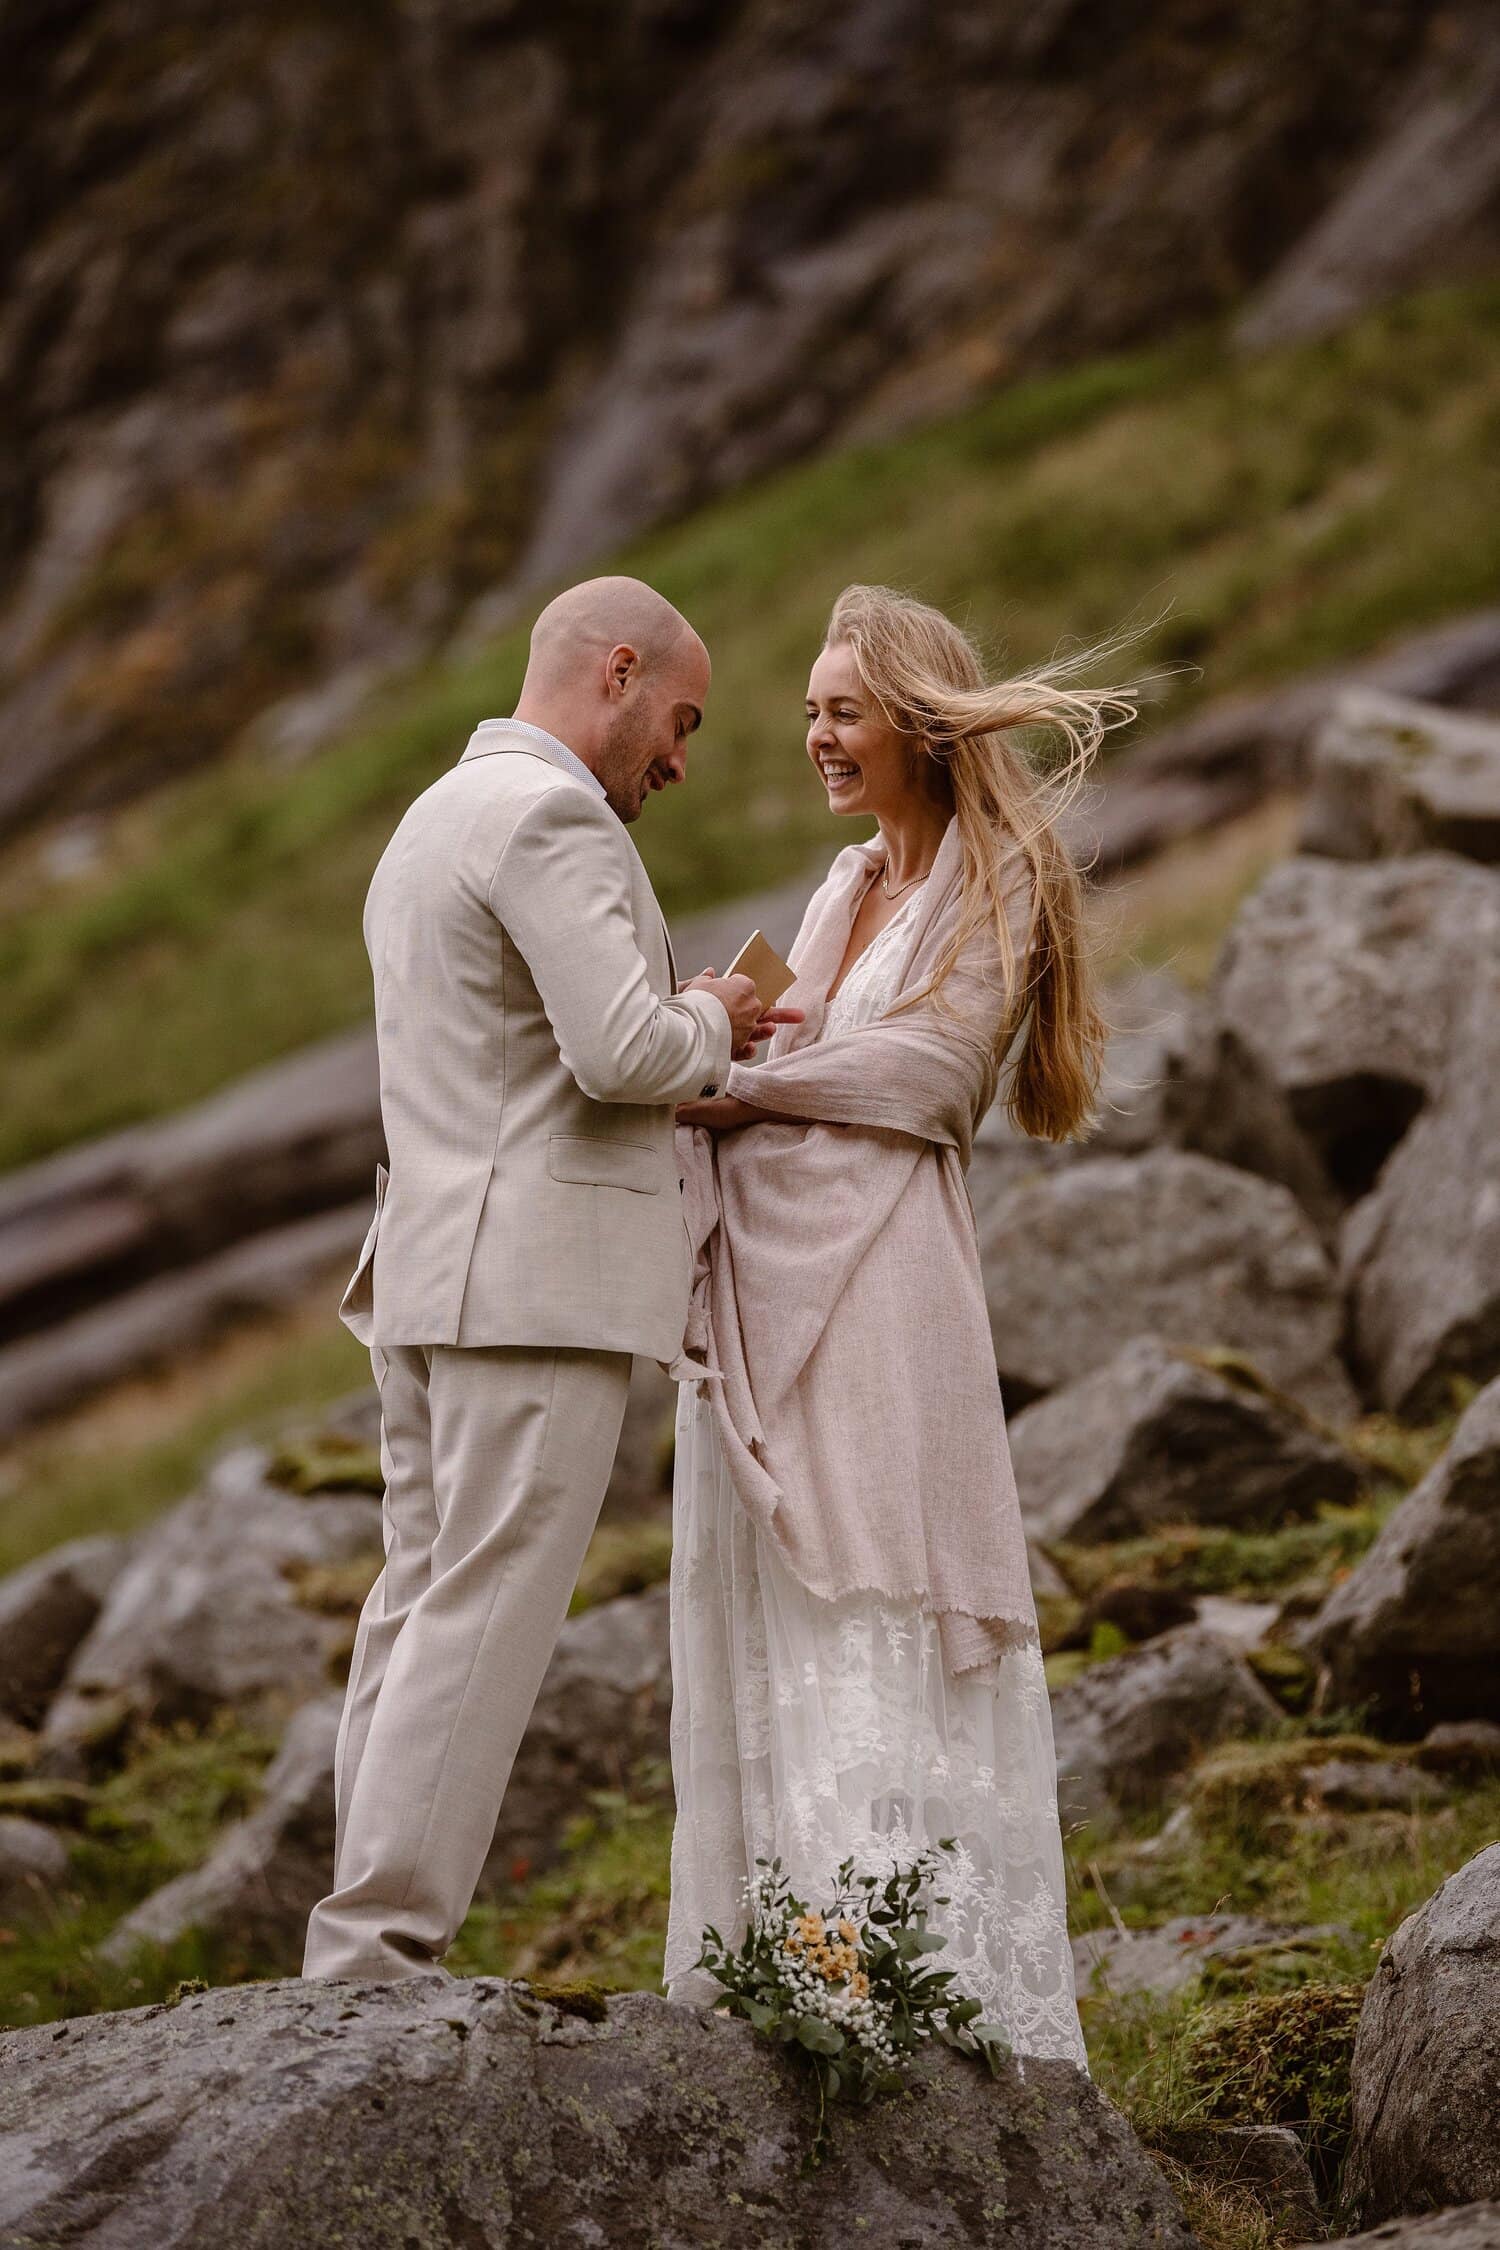 Groom reads his vows during an intimate elopement ceremony on the beach in Norway. The bride and groom are both smiling.